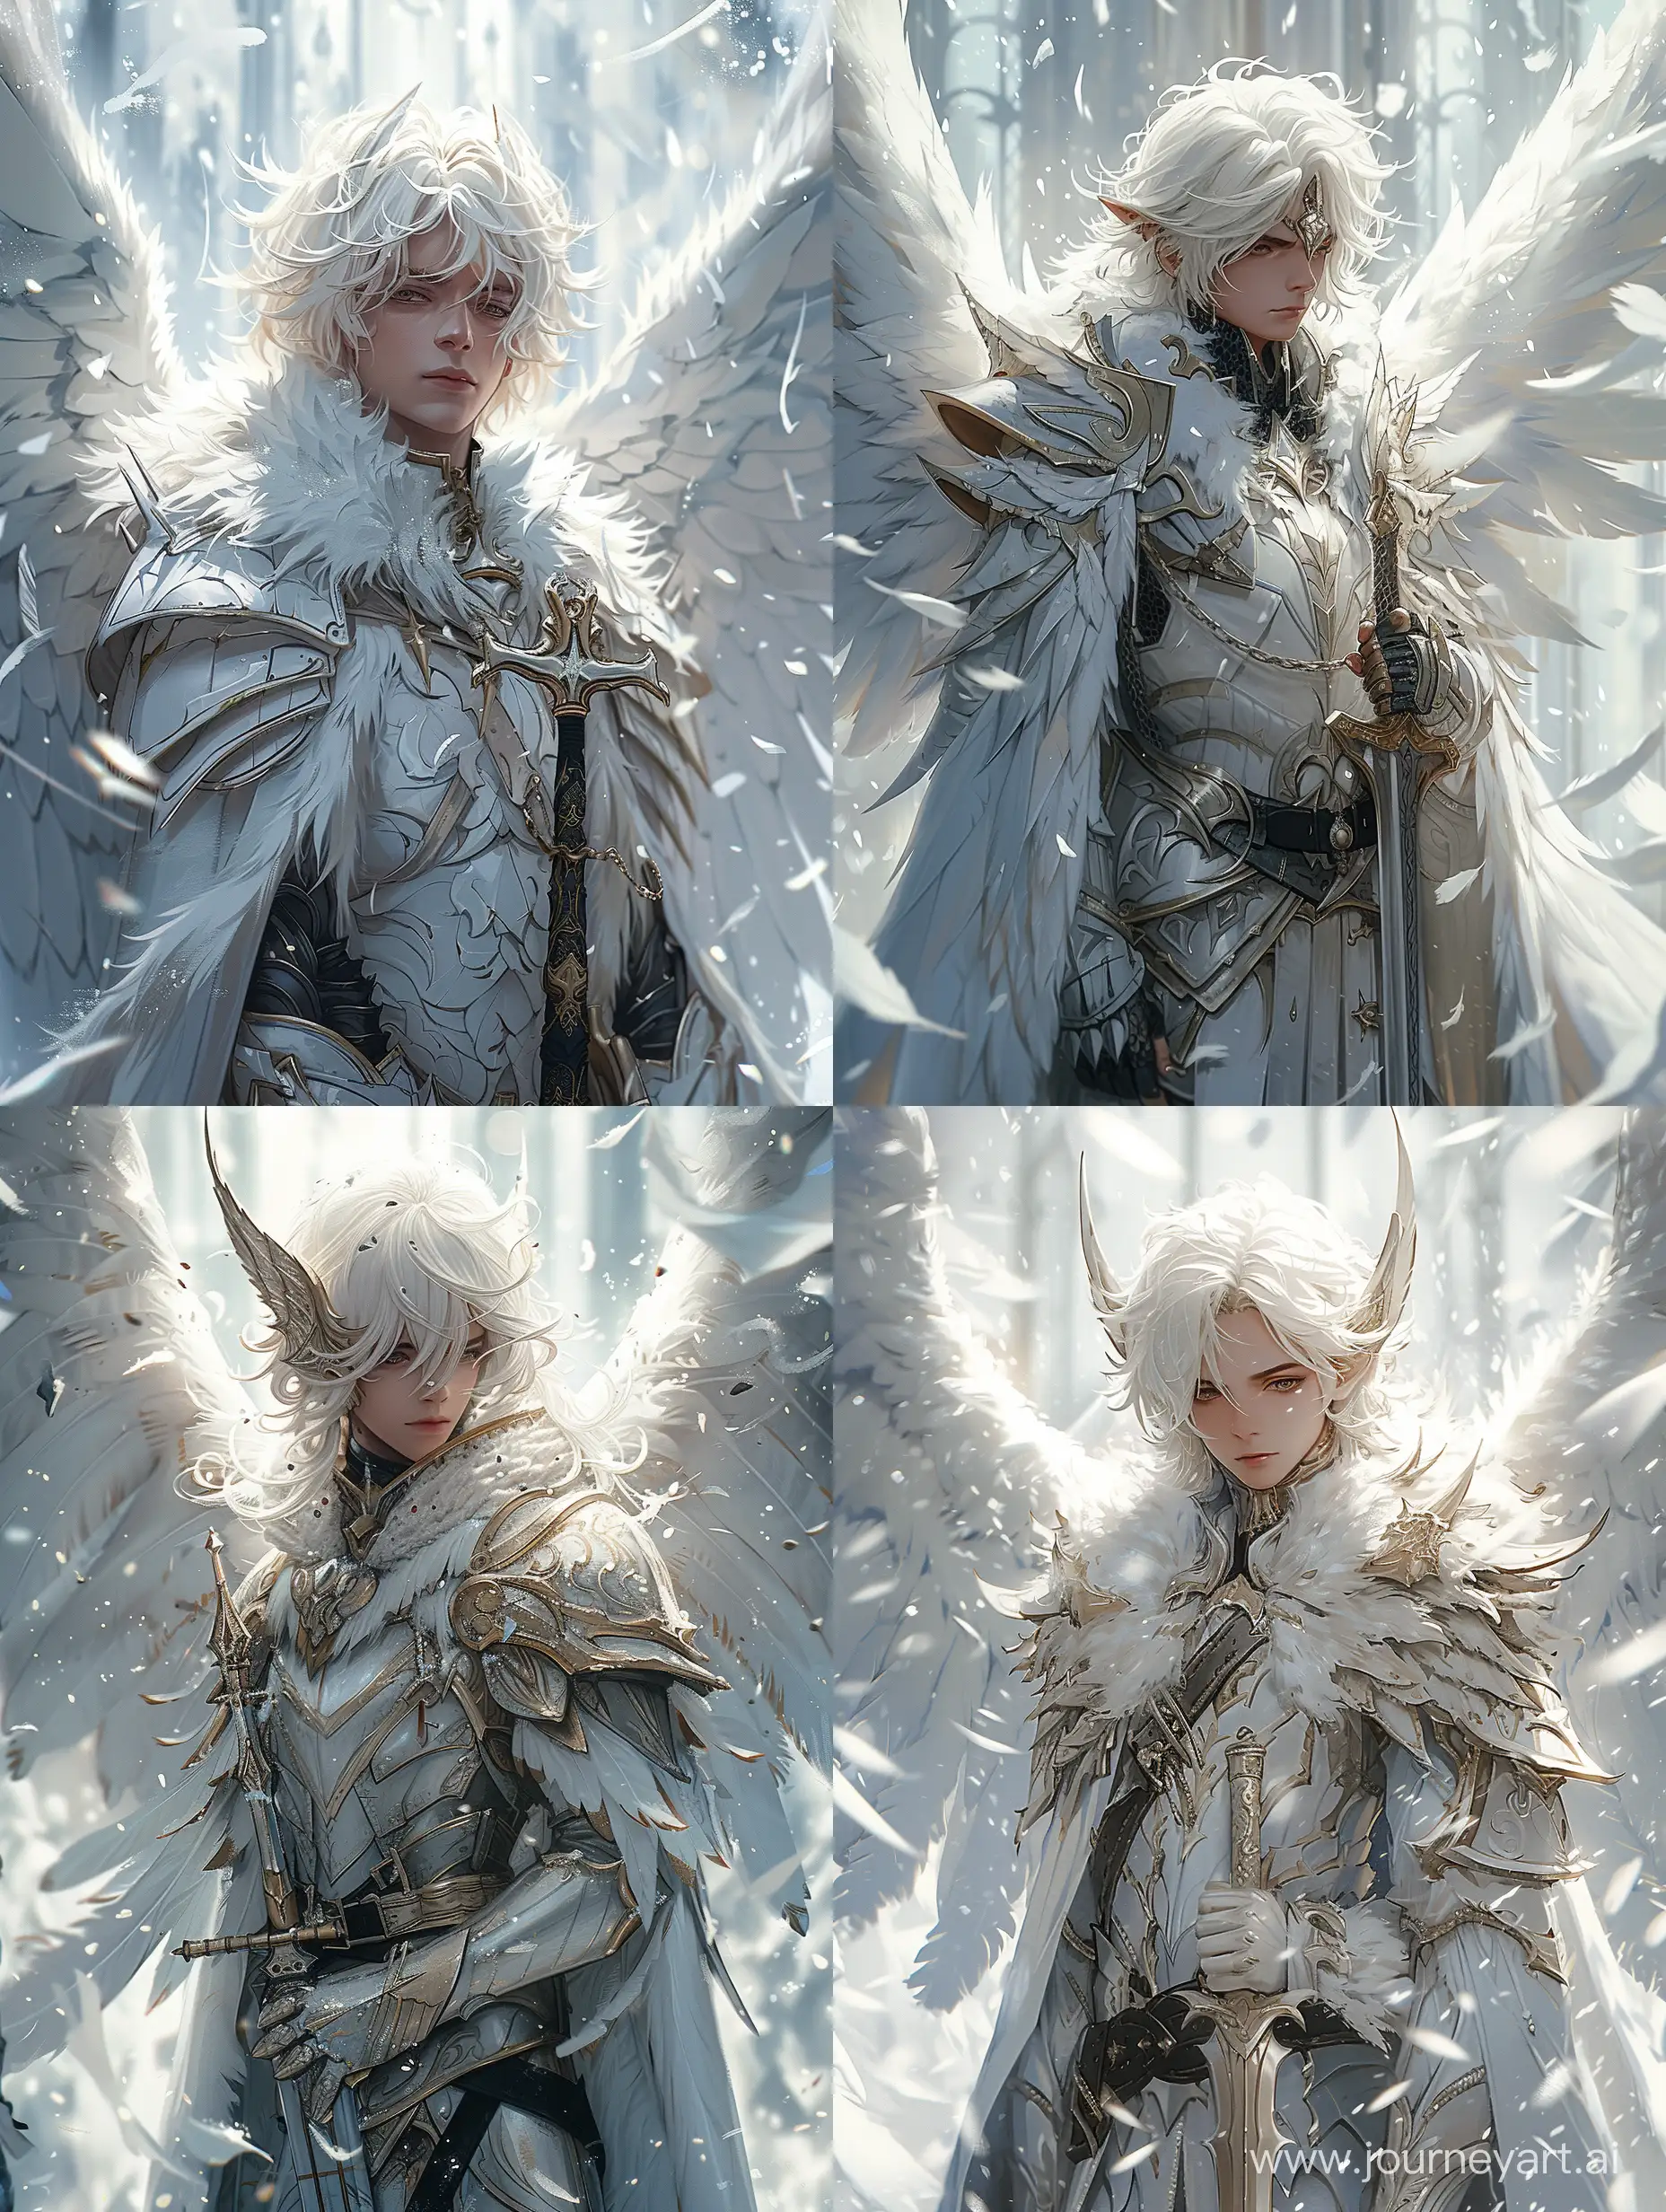 https://i.postimg.cc/JzhqHGKb/17060924644208h3tbirw-2.png realism::1.3, 8K, male character dressed in white armor, with wings and a sword, he has white hair and is standing in a room with white walls and snowflakes floating around him, --s 500